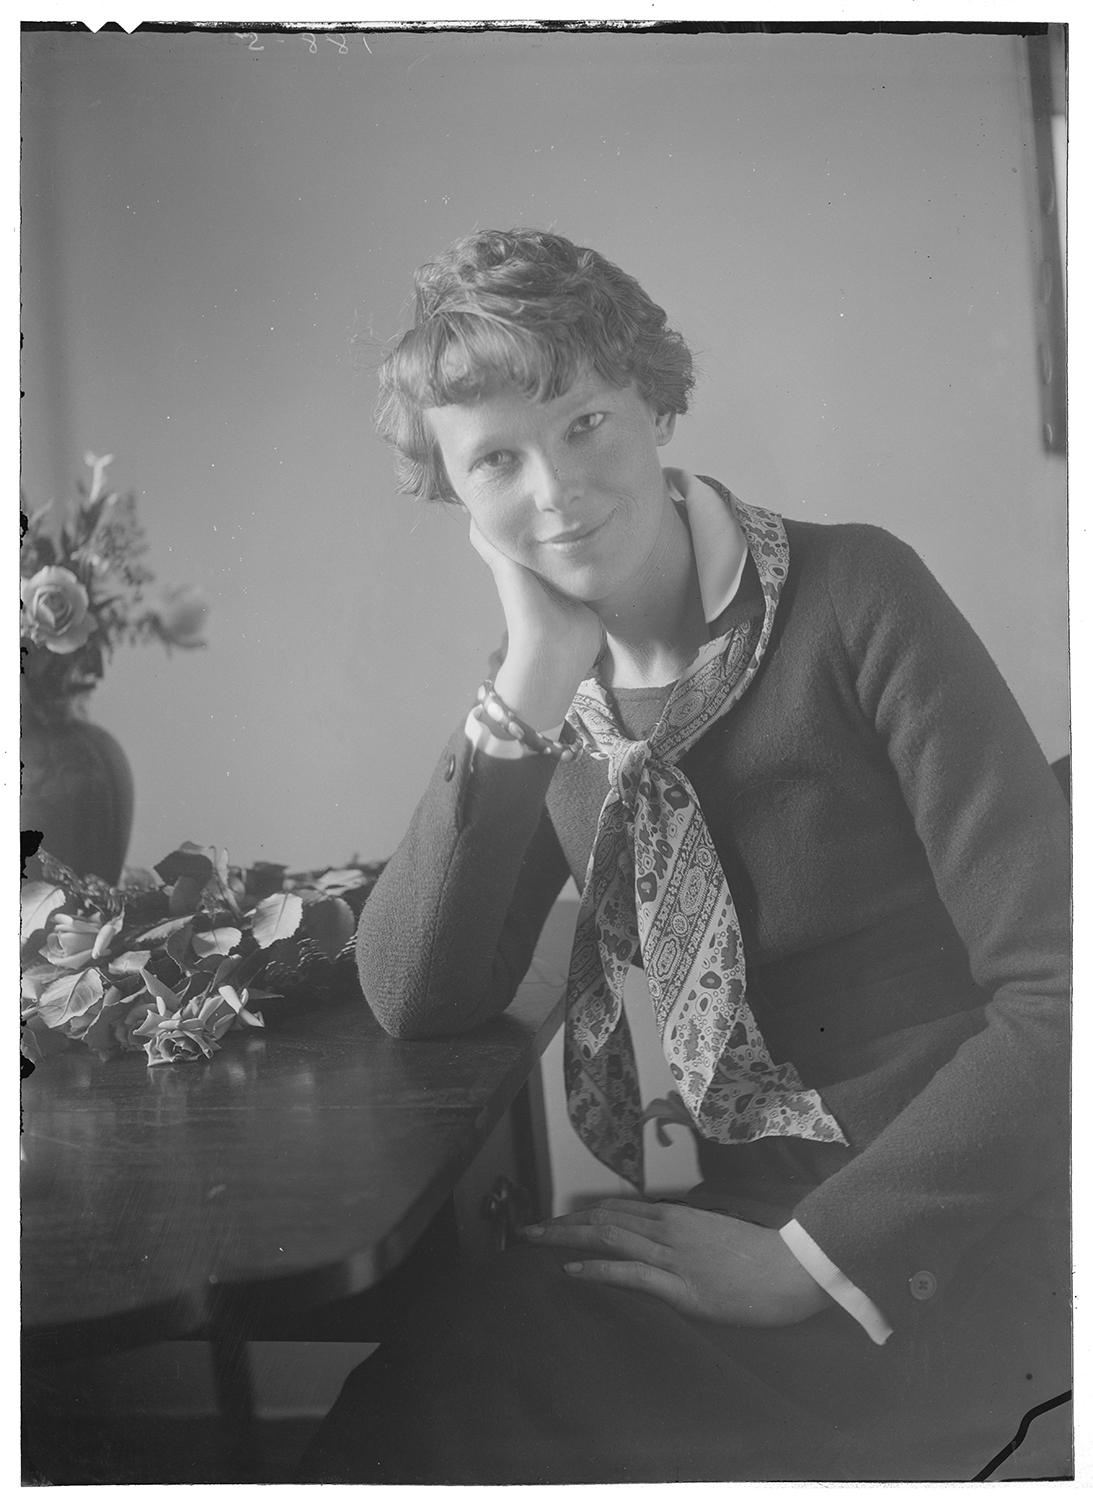 A portrait of a woman sitting down with her hand on her cheek and the other on her lap looking towards the camera. There is a vase of flowers beside her.  Black and white photograph by Violet Keene Perinchief.